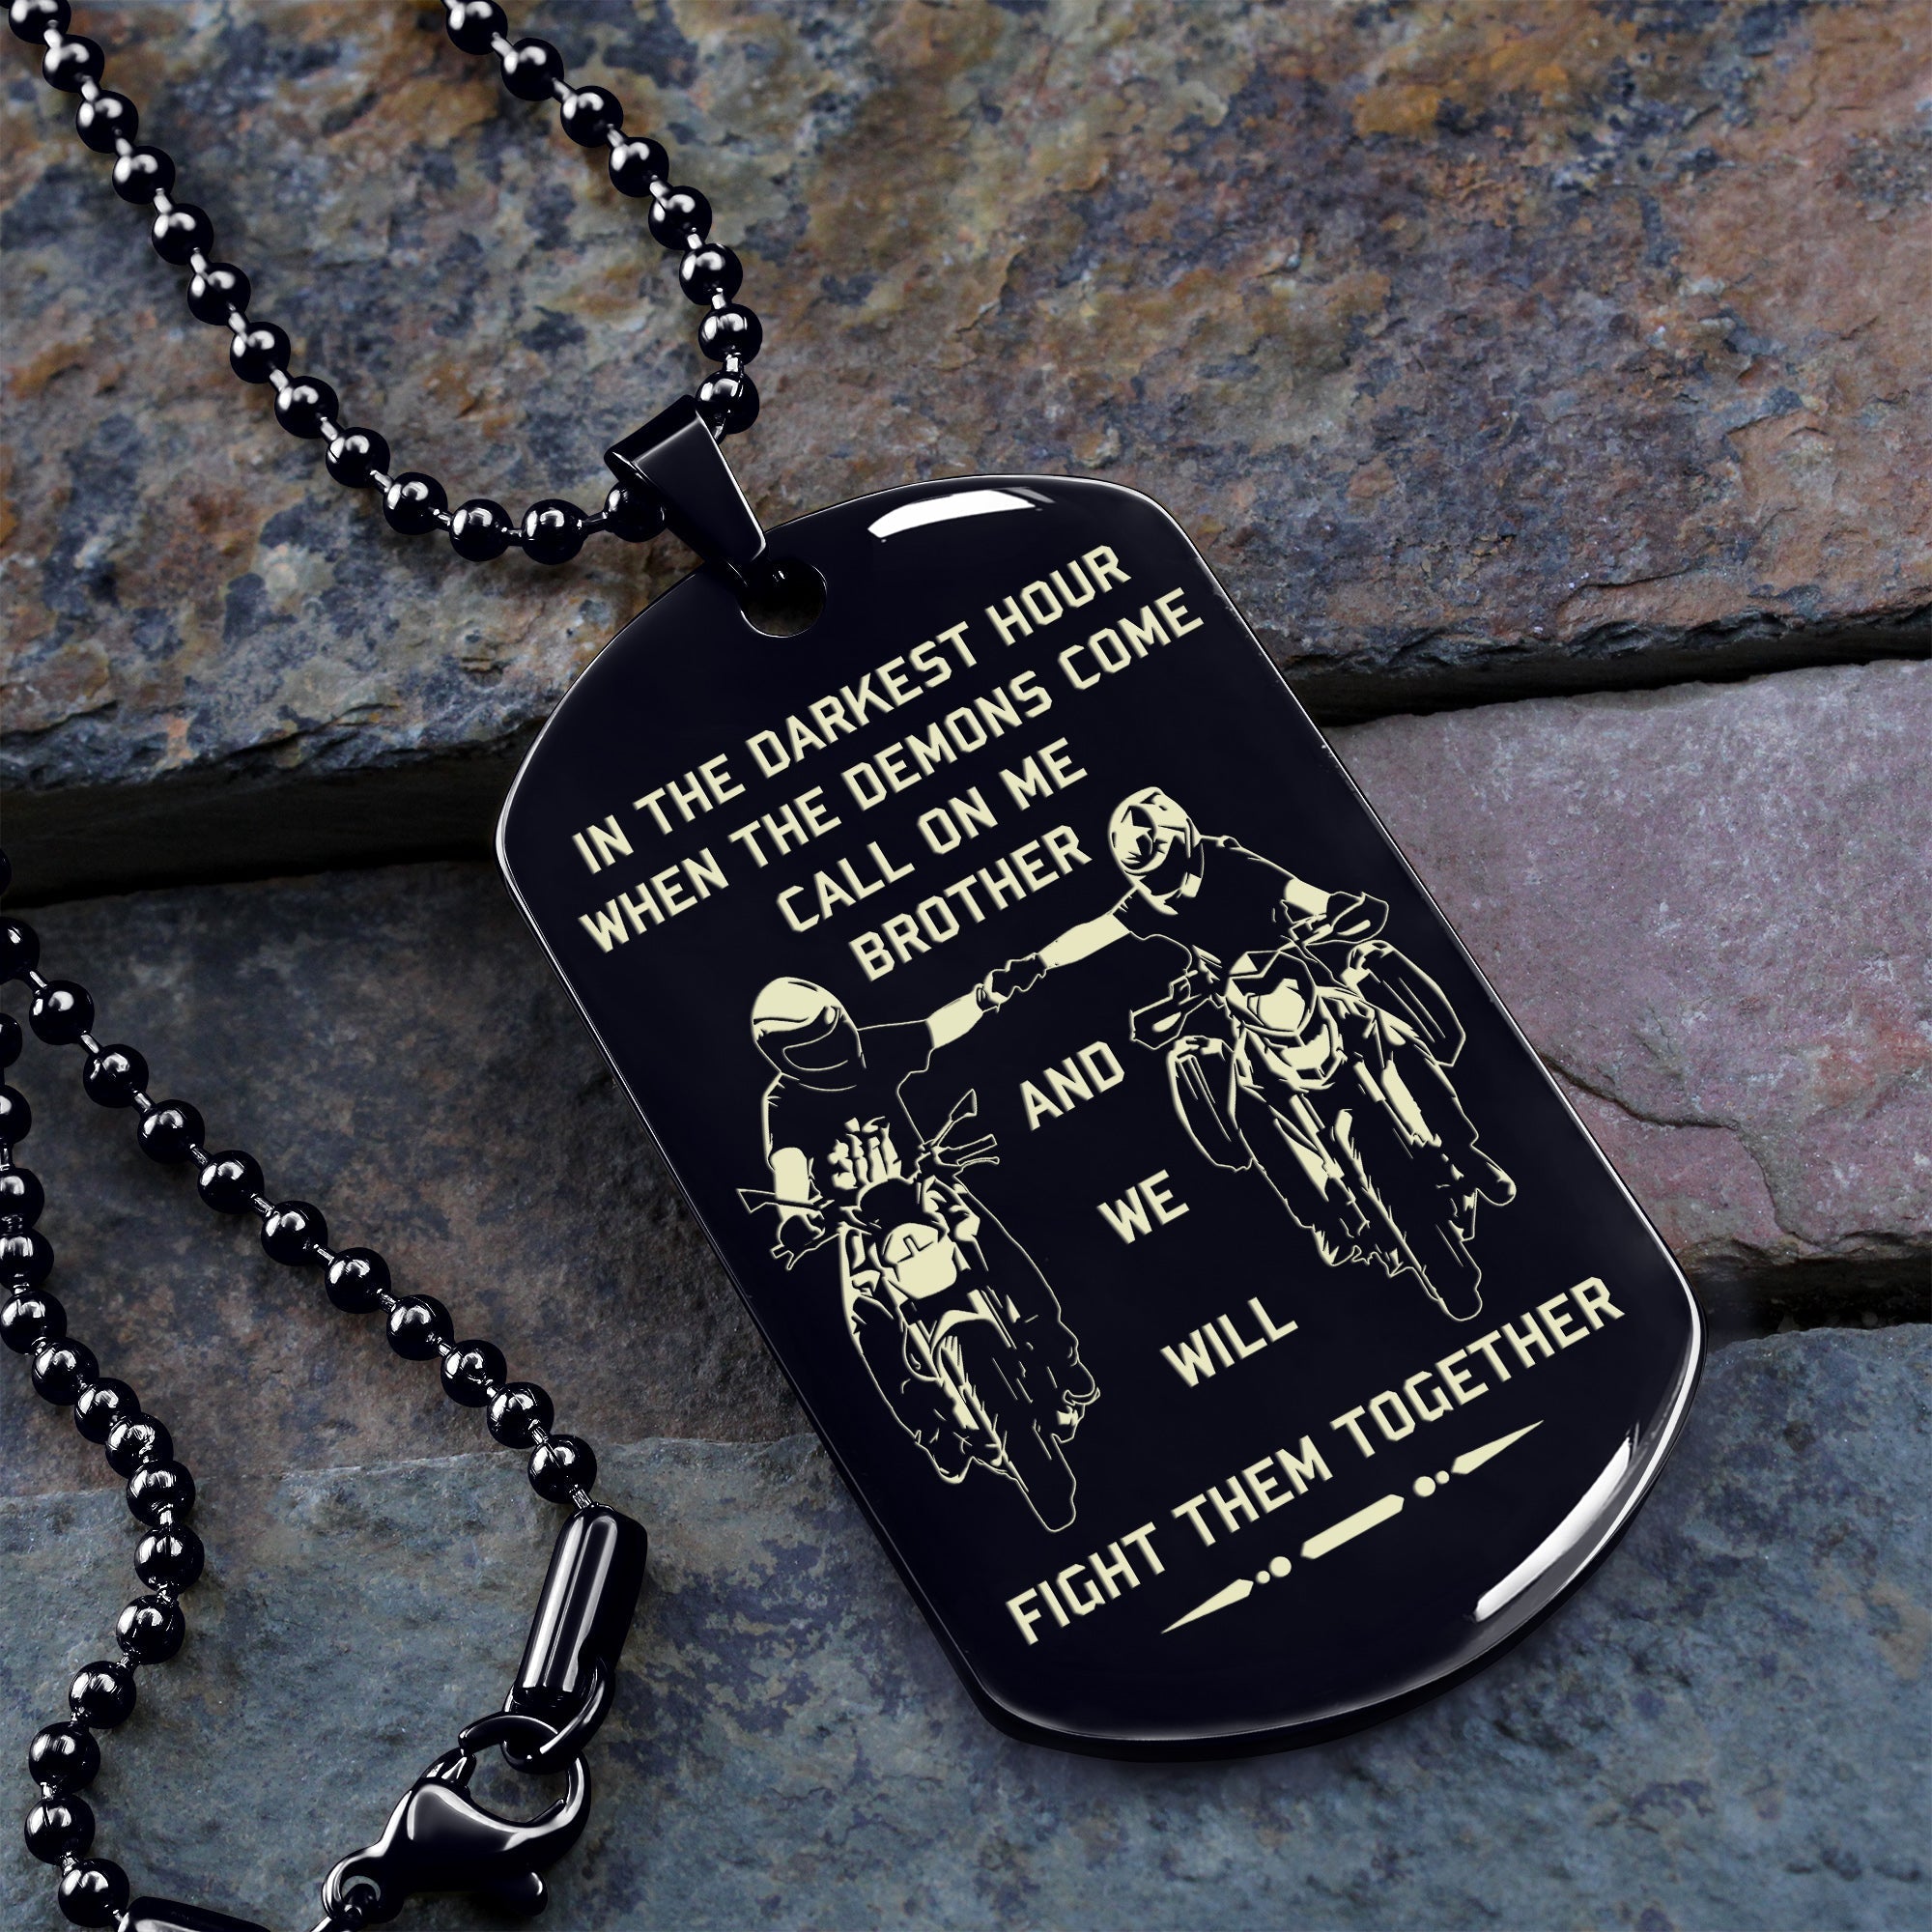 Samurai Customizable engraved brother dog tag gift from brother, In the darkest hour, When the demons come call on me brother and we will fight them together